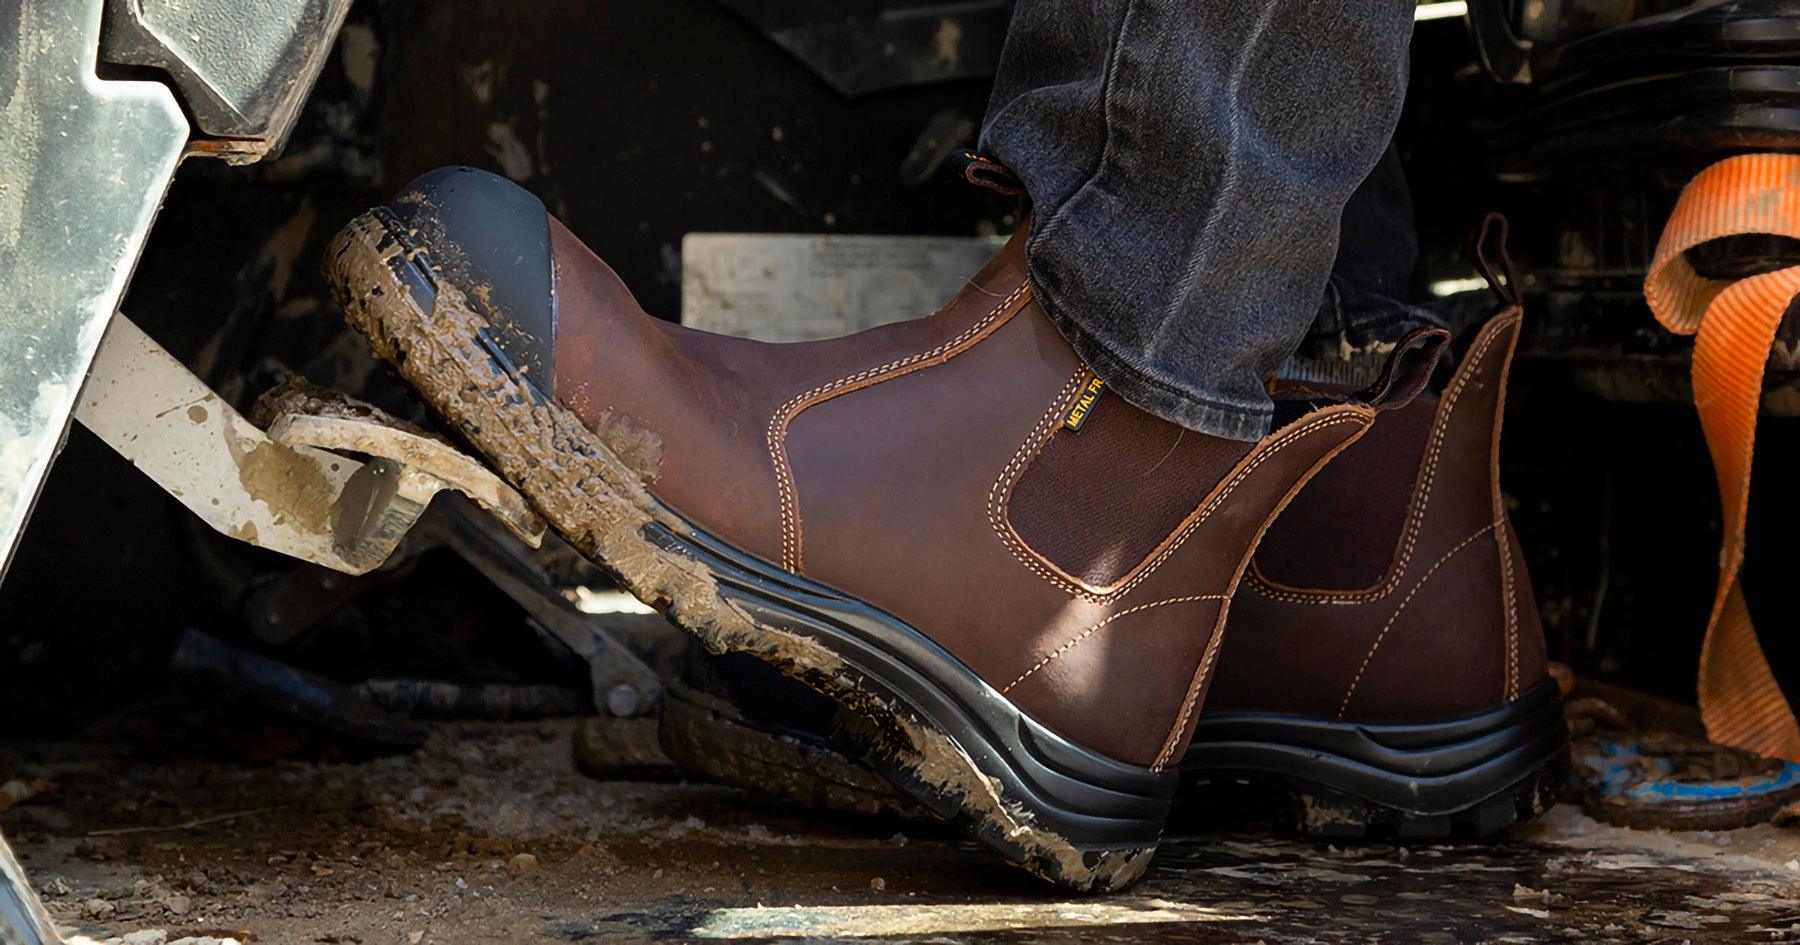 Construction Boots in Canada - MooseLog